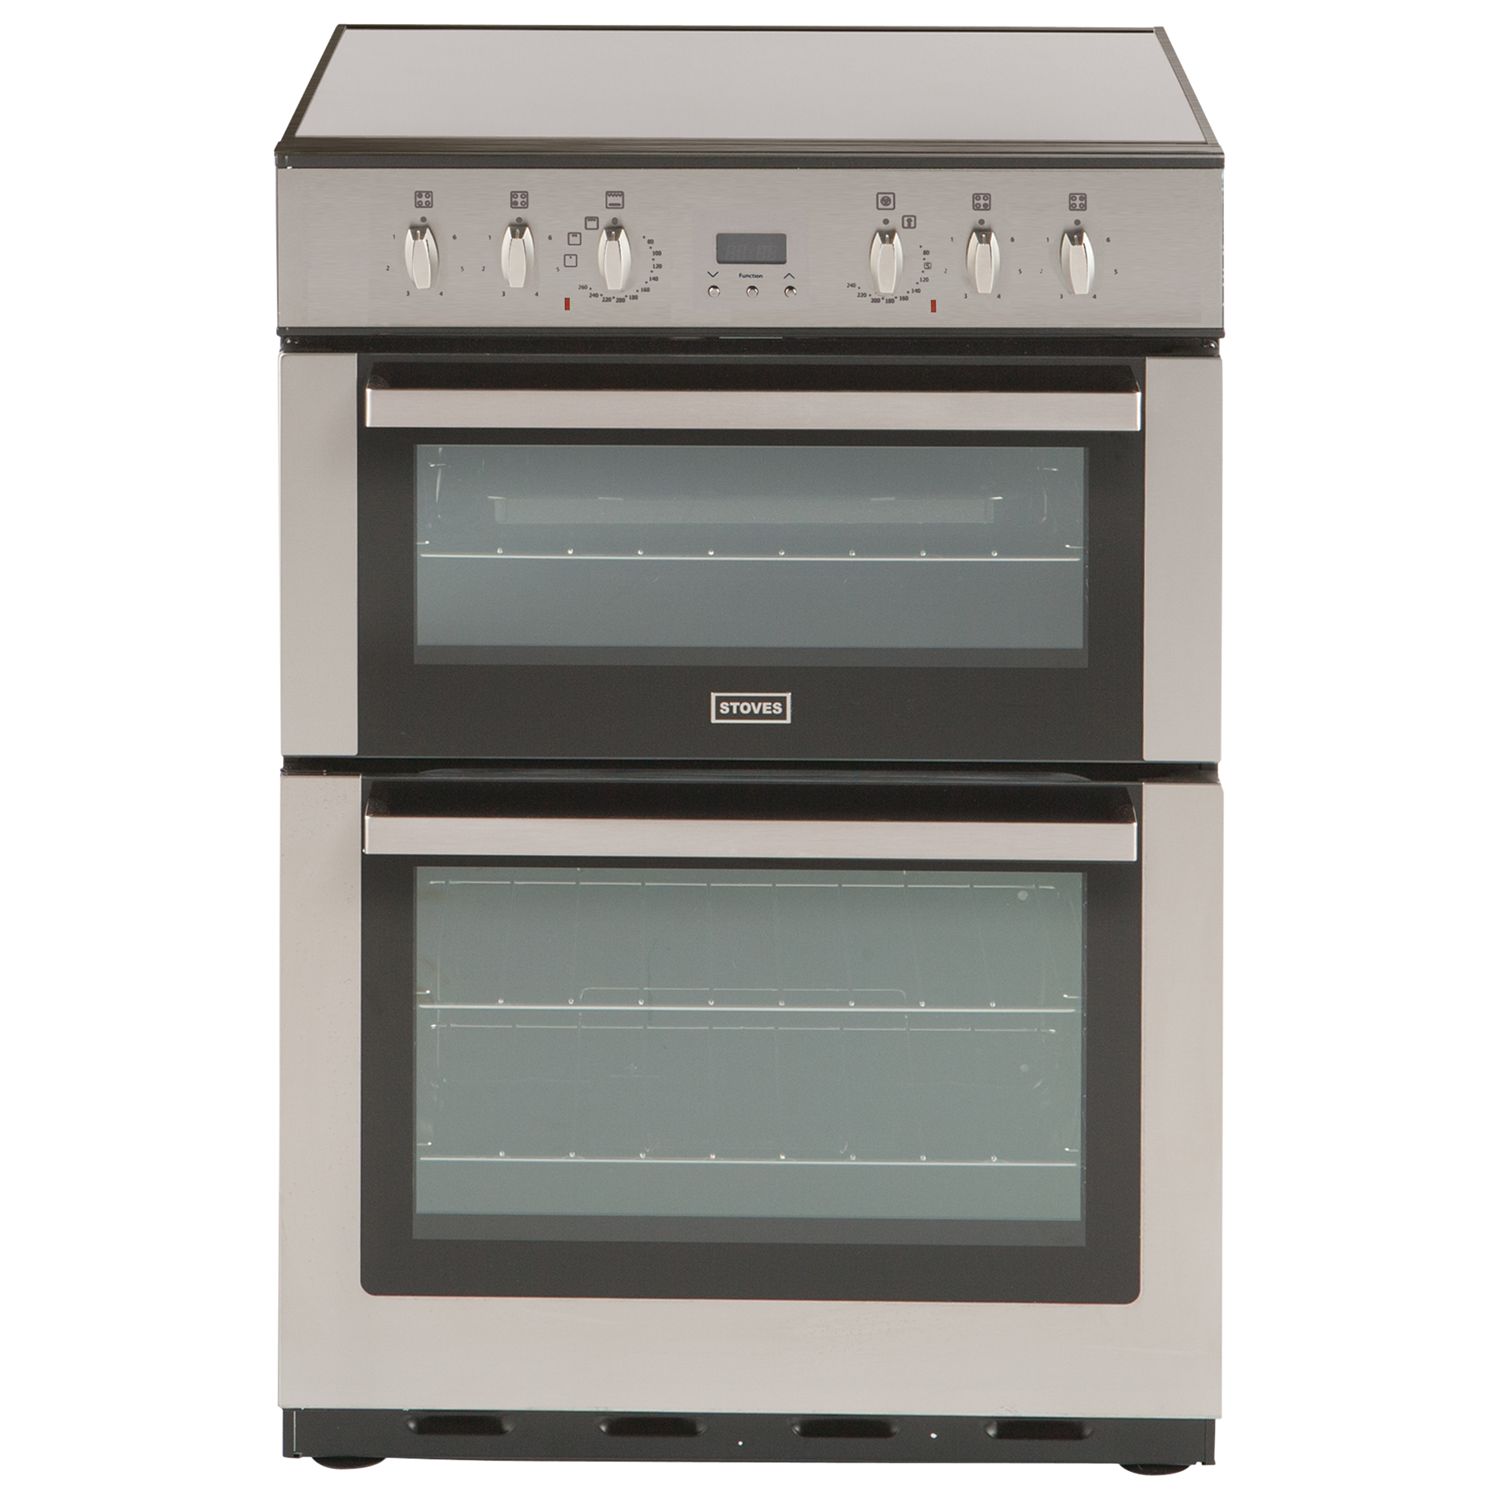 Stoves SEC60DOP Electric Cooker, Stainless Steel